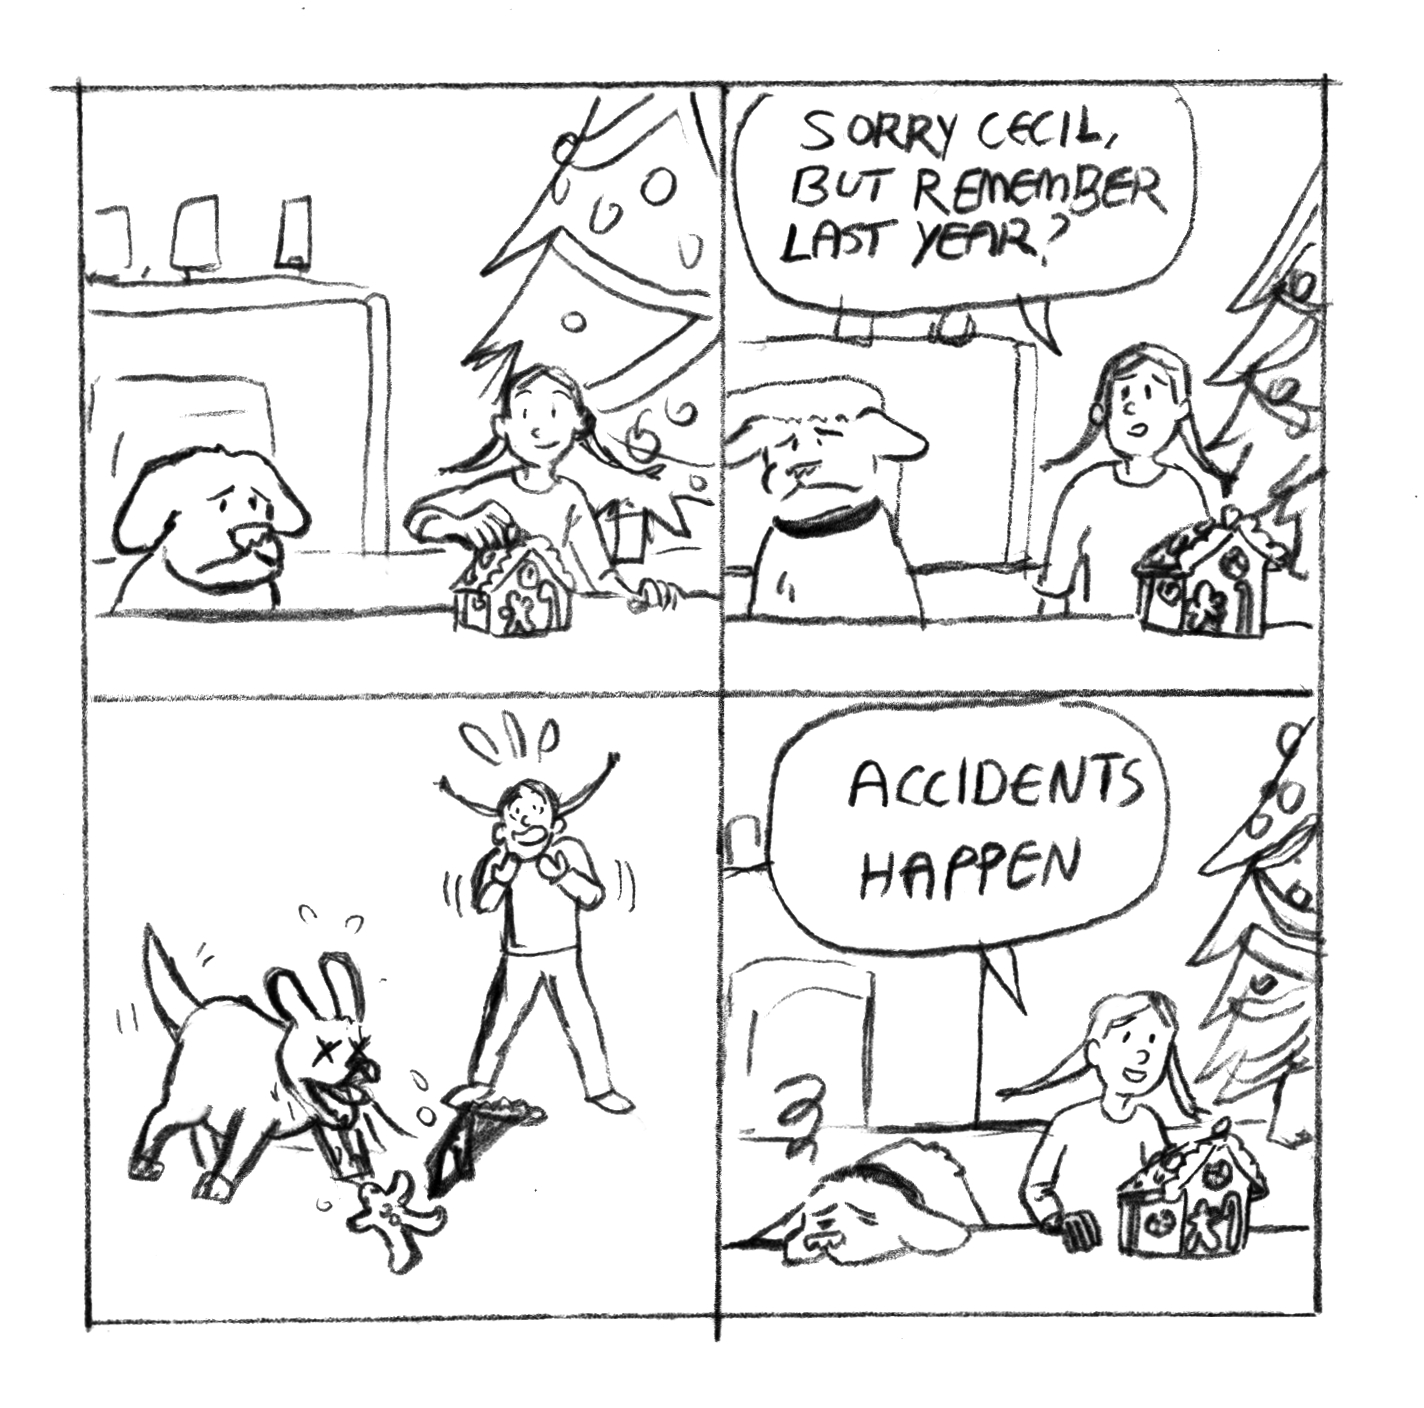 Suzy and Cecil - Holiday Strips - Page 1